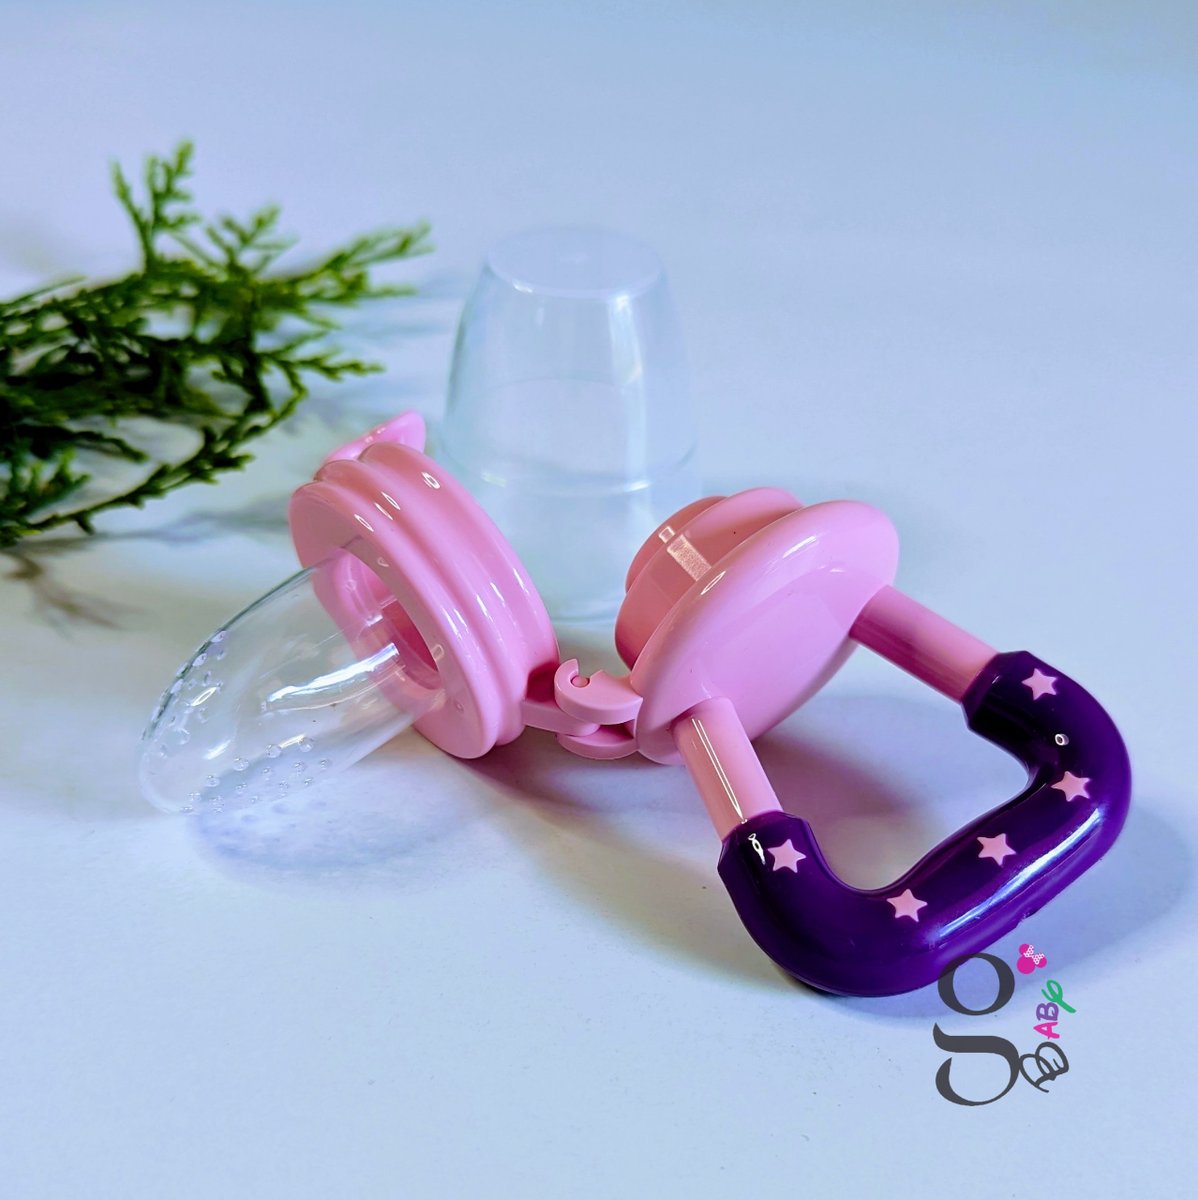 Silicone Fruit Feeder Pacifier—a taste of happiness for your little one! 🍓👶 Soothe and delight with this safe, mess-free way to introduce flavors. #GiseldaBaby #BabyTeething #FruitFeeder #ParentingEssentials #HealthyBabies #MomLifeMagic #TeethingSolutions